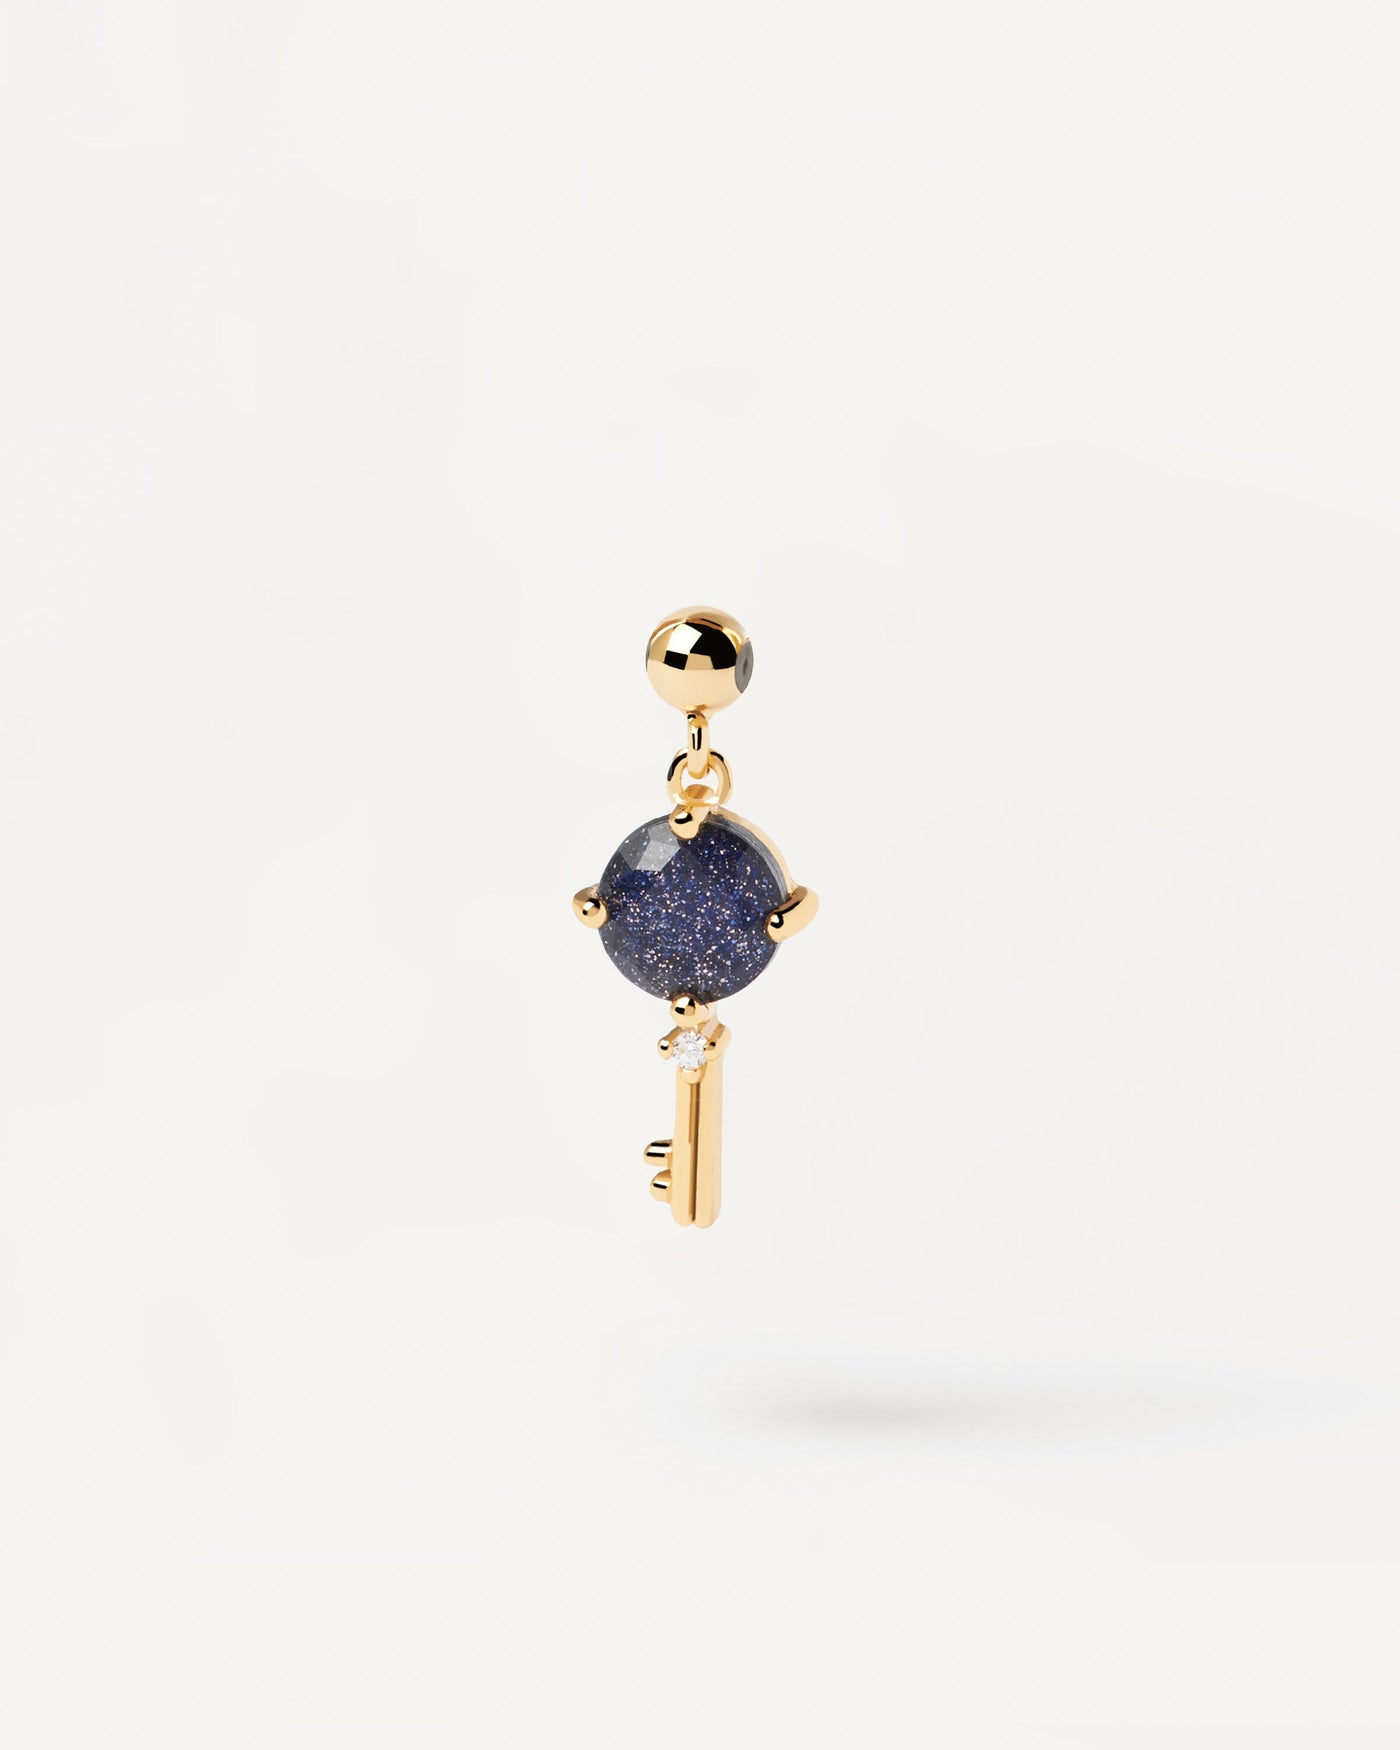 2023 Selection | The Key Charm. Gold-plated silver key pendant for Charm necklace or bracelet with blue gemstone and zirconia. Get the latest arrival from PDPAOLA. Place your order safely and get this Best Seller. Free Shipping.